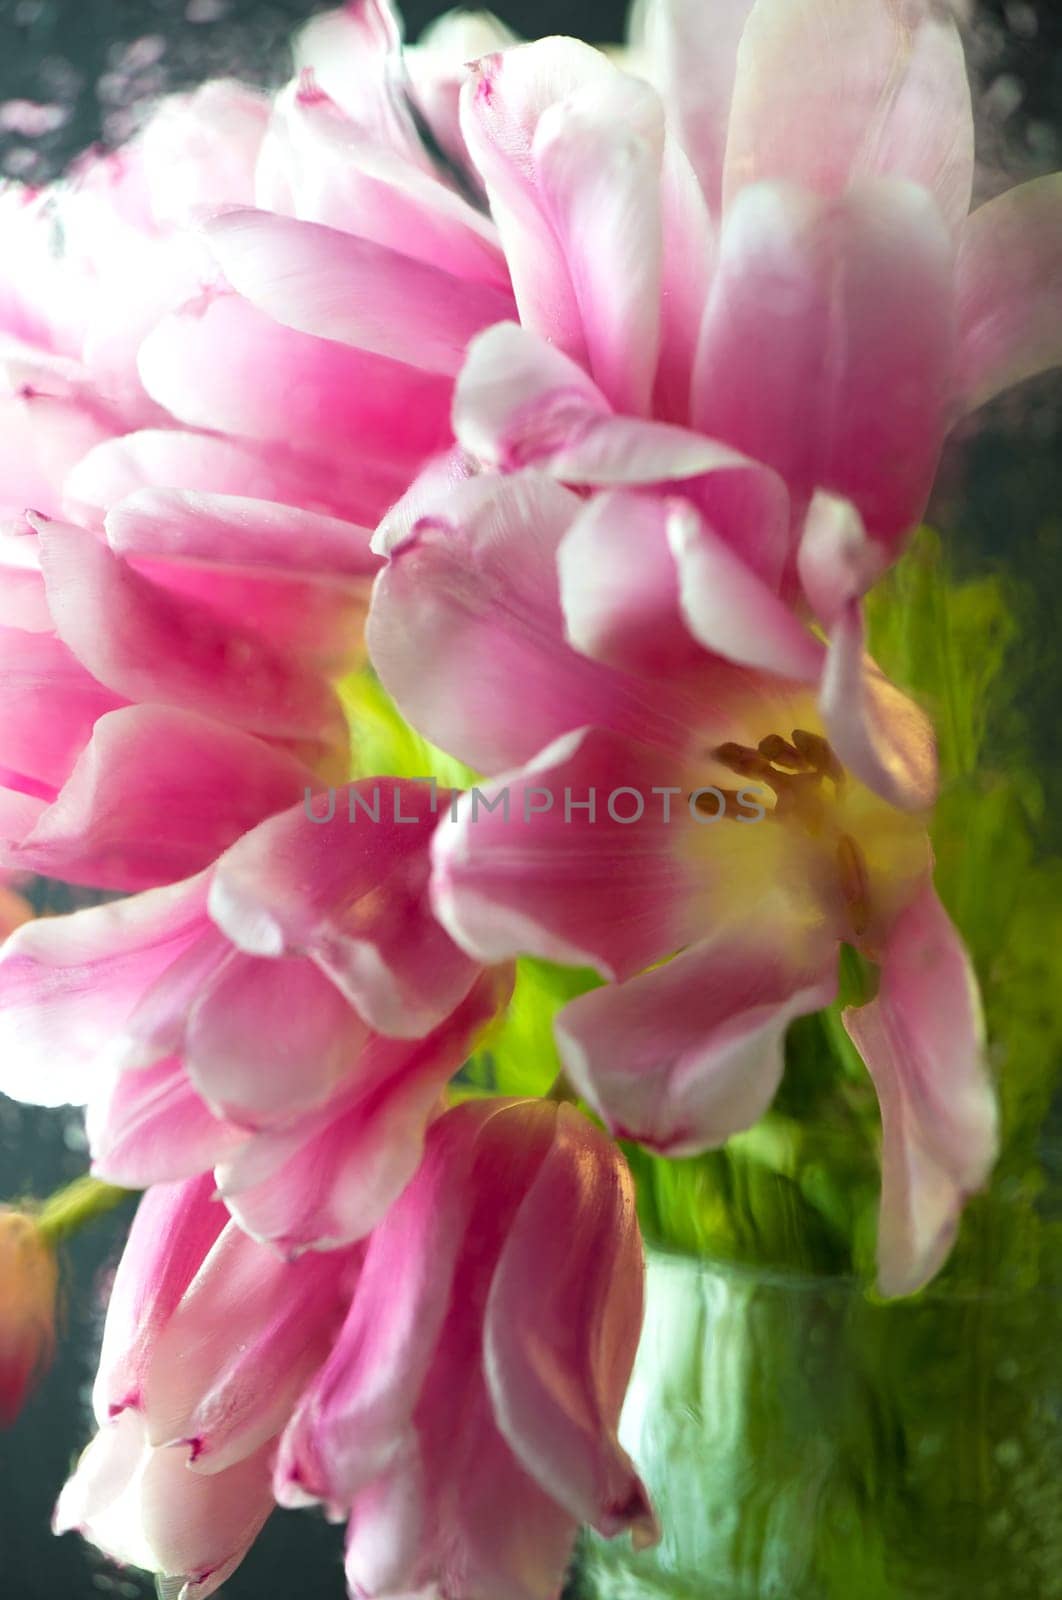 Colorful tulips for Mother's Day or for another holidays, anniversary, birthday on marble background through raindrops on glass, window. Beautiful spring flowers.Selective focus. by aprilphoto